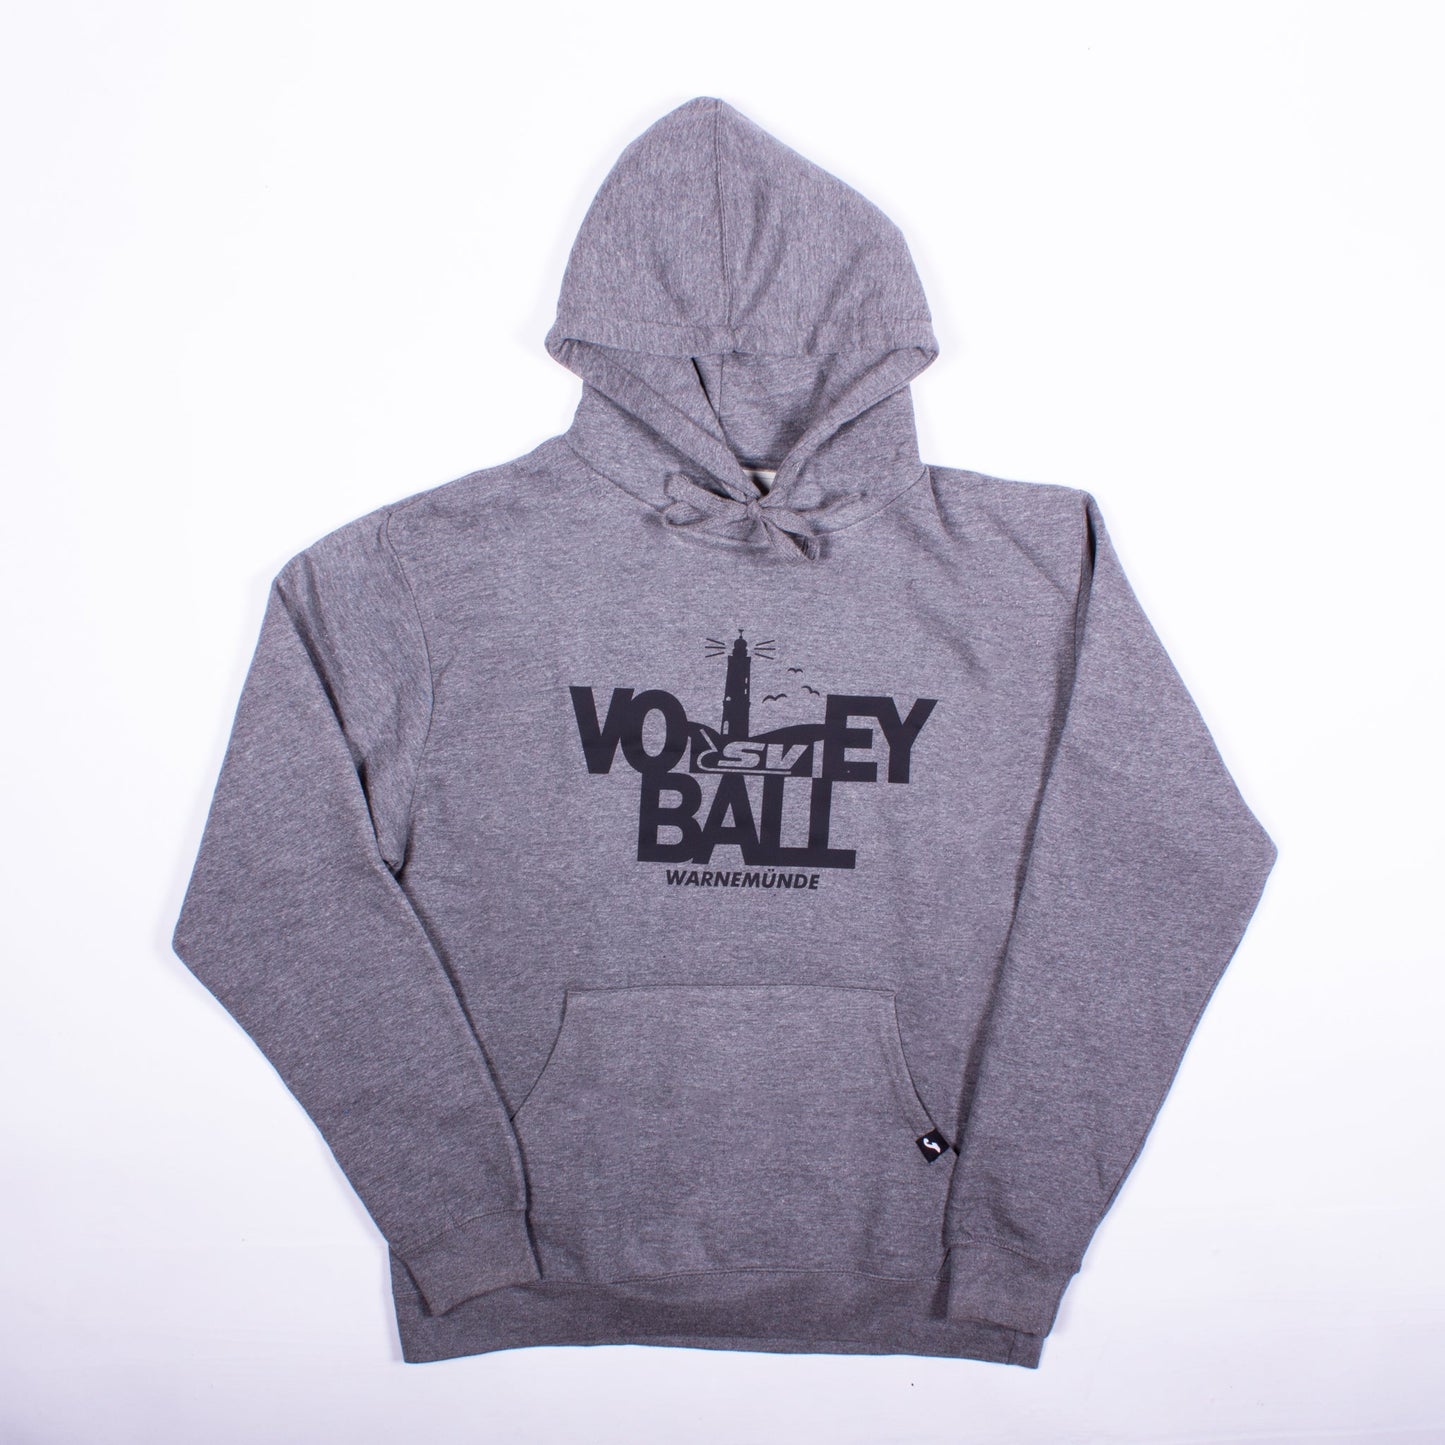 SVW Hoodie - Volleyball